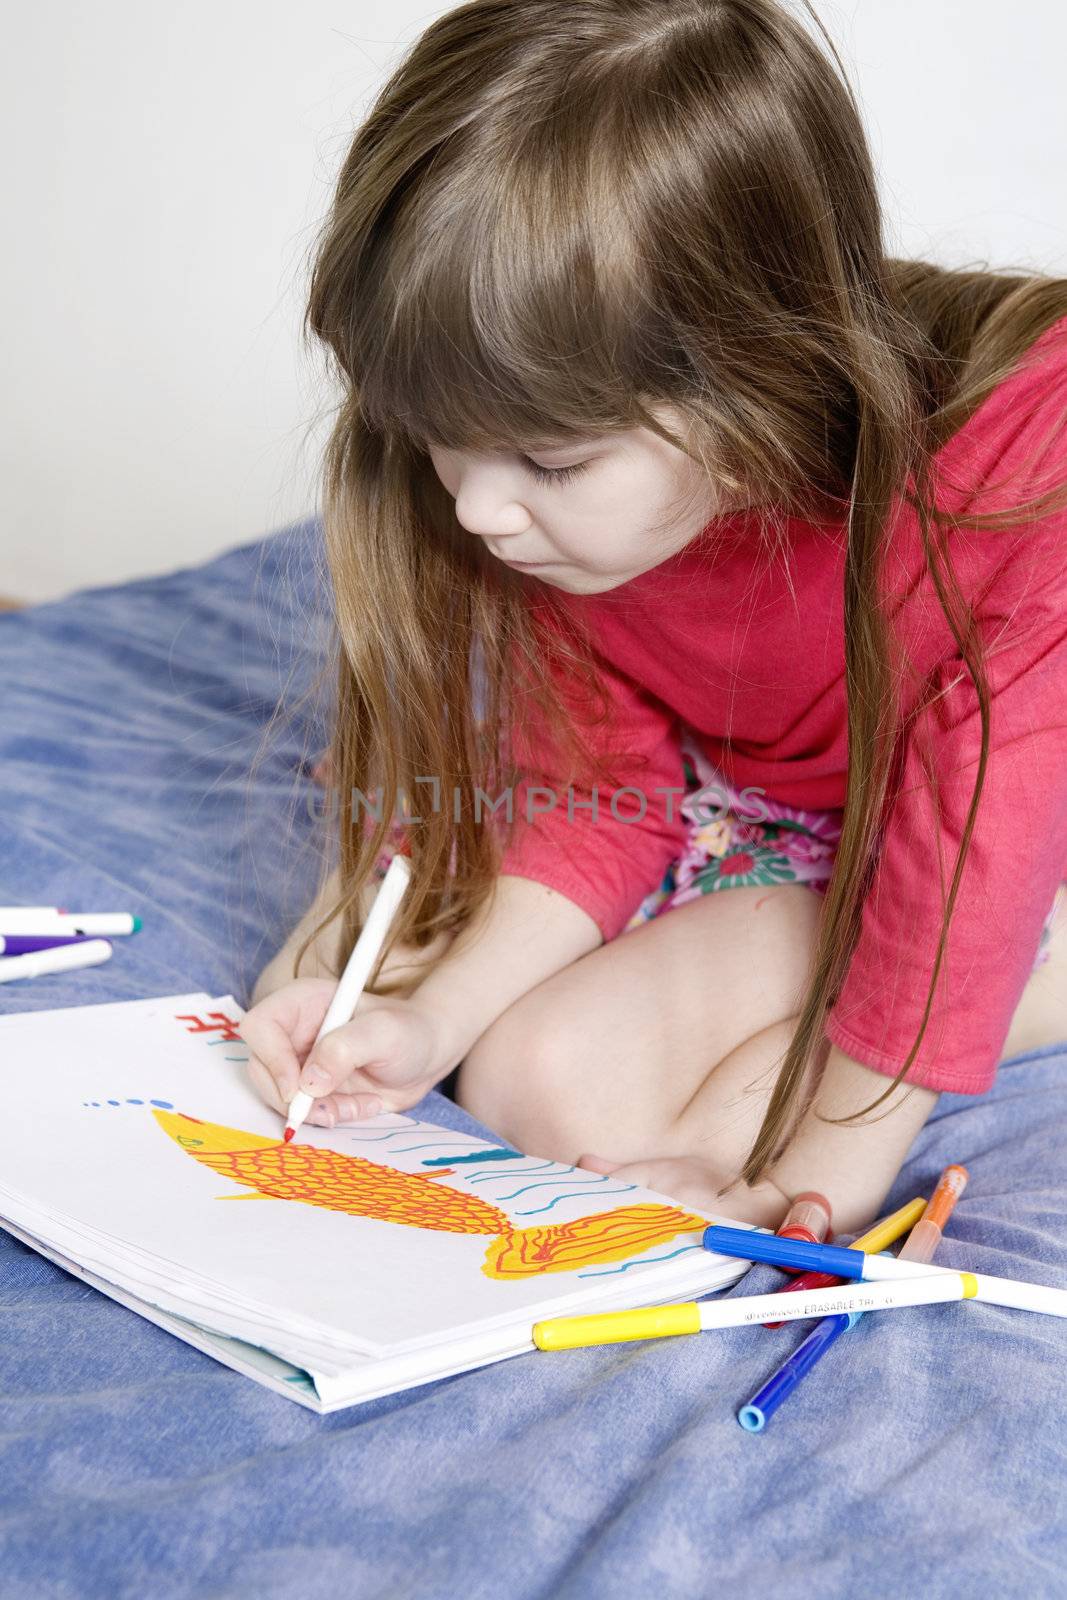 little cute smiling girl seven years old with drawing picture